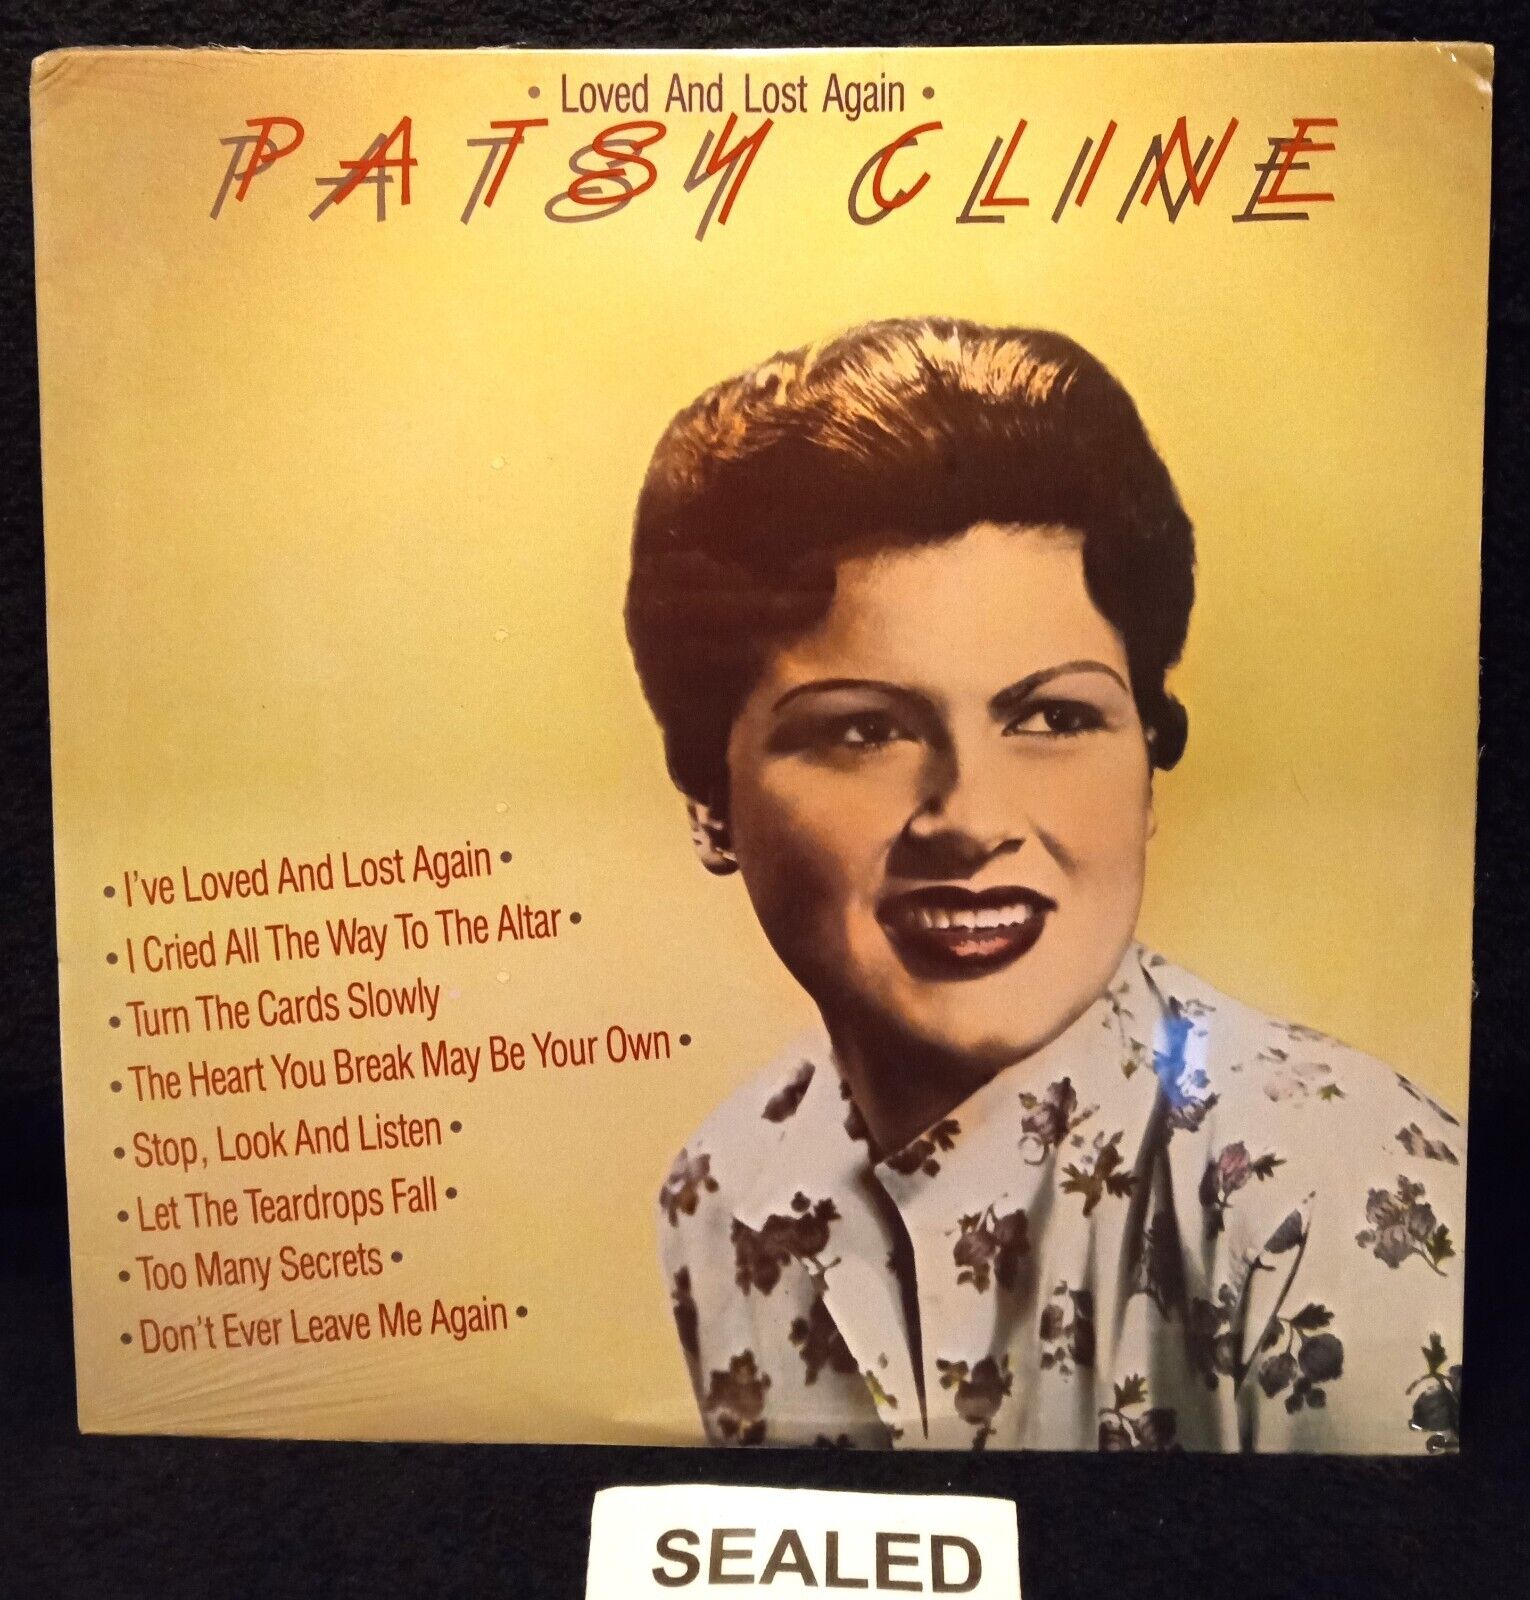 ALPHA BY ARTIST:CLINE, PATSY (LOVED....) NEW:"CLASSIC COUNTRY" DISCOUNT-VINTAGE-VINYL-LP LOT ($5 NO LIMIT SHIP)  4-09-24